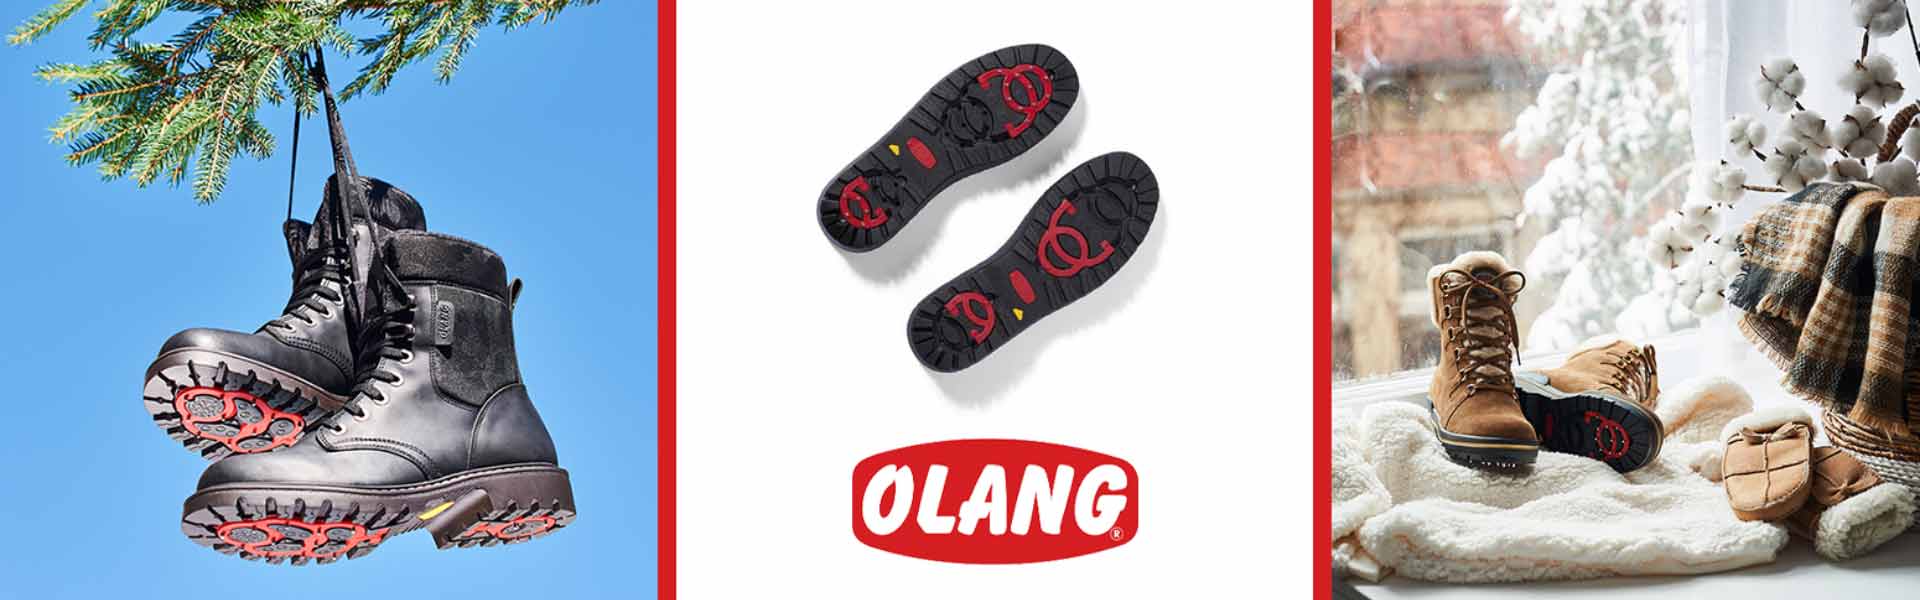 Olang Boots